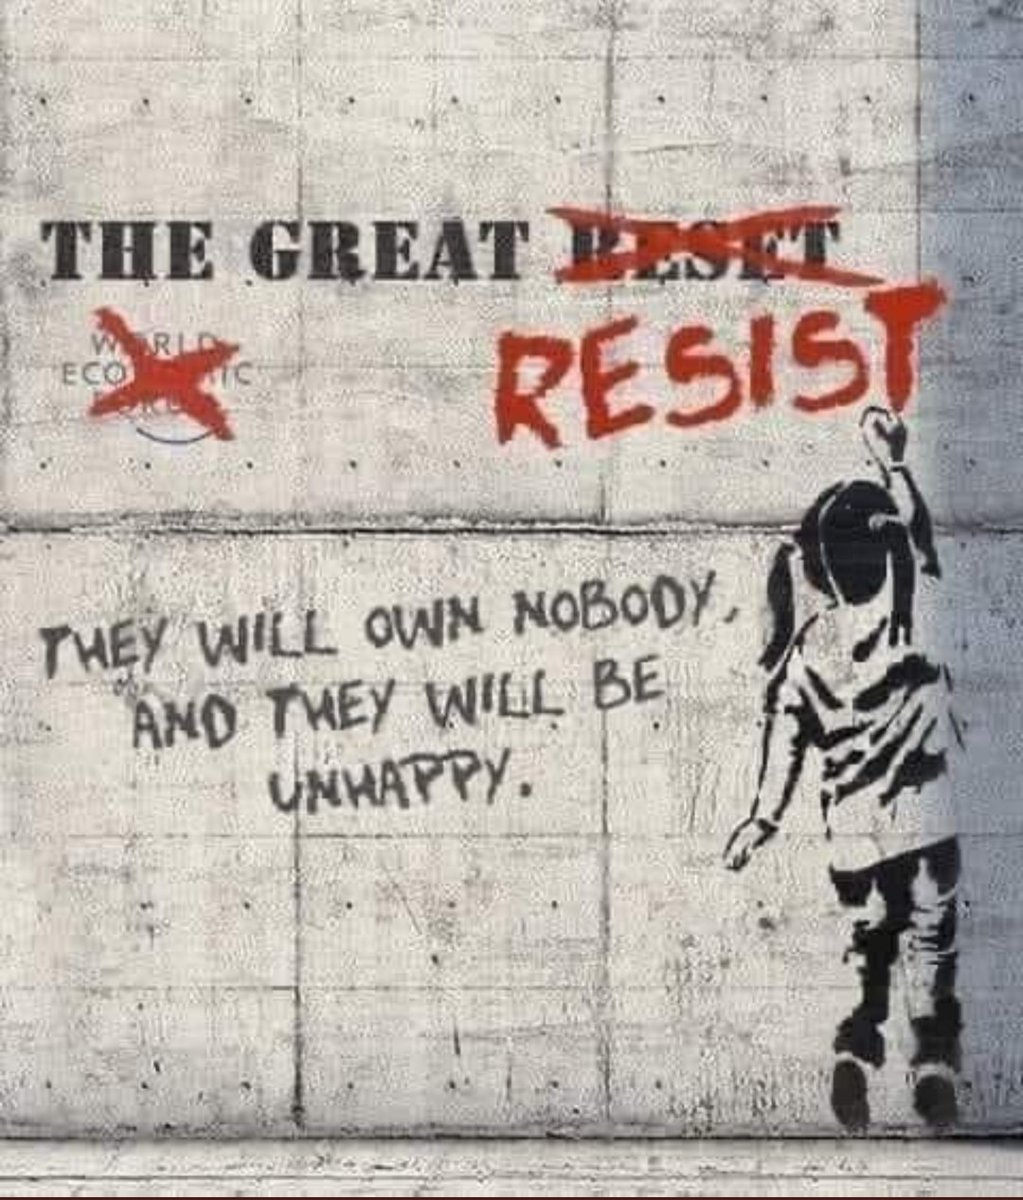 🗣📣 #PeoplePower 💪❤️🙏

People should not be afraid of their governments. . 
Governments should be afraid of their people.  Remember that 💯

#TheGreatResist -
'They will own Nothing and be unhappy.'

#NoToTheGreatReset #Resist 
#Together We're Not One Ant.